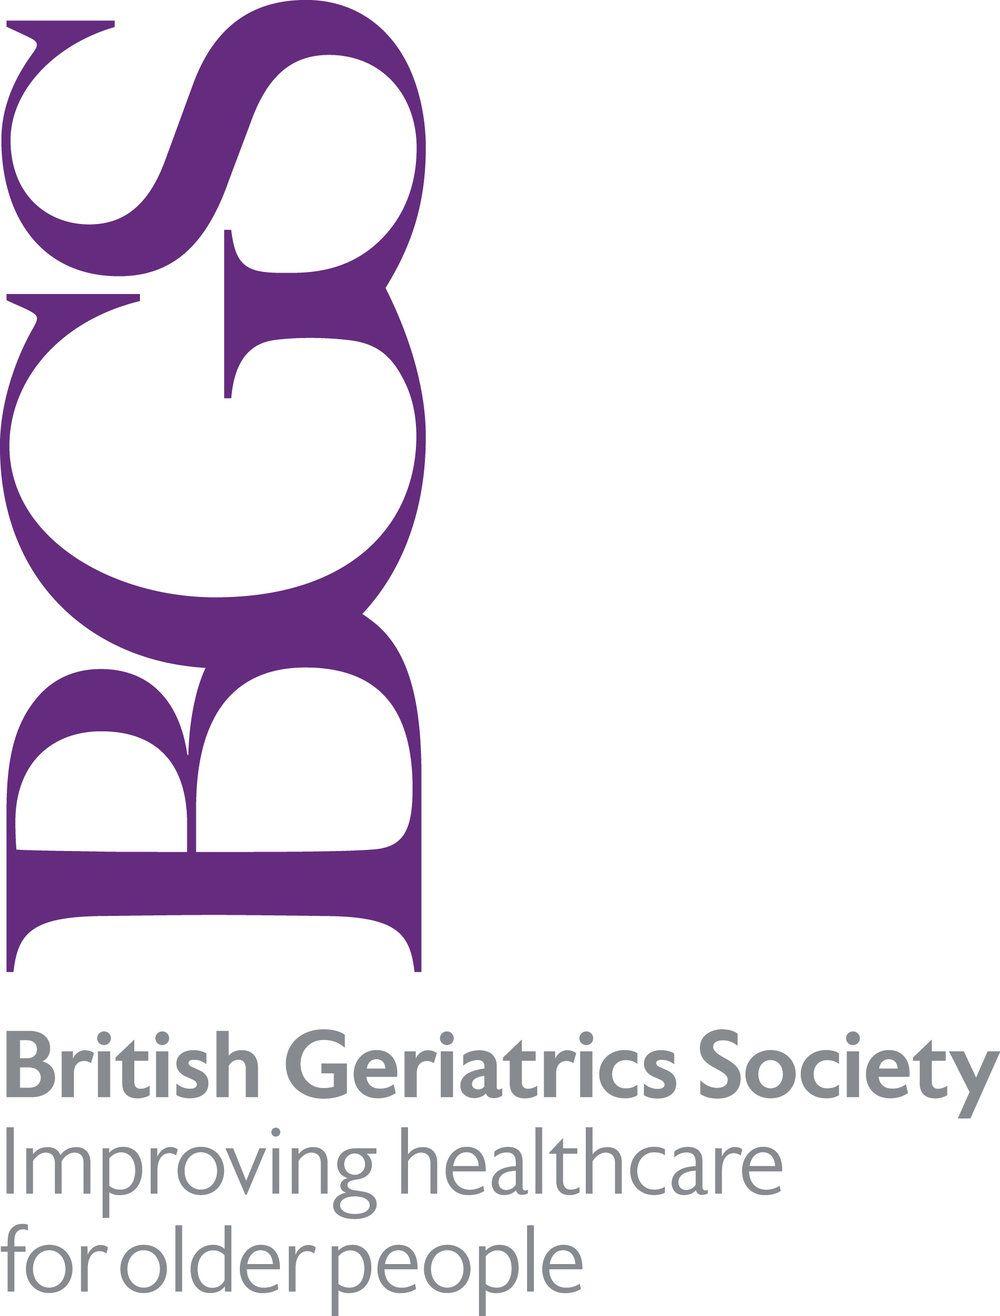 Purple and Grey Logo - Upcoming events from the British Geriatrics Society